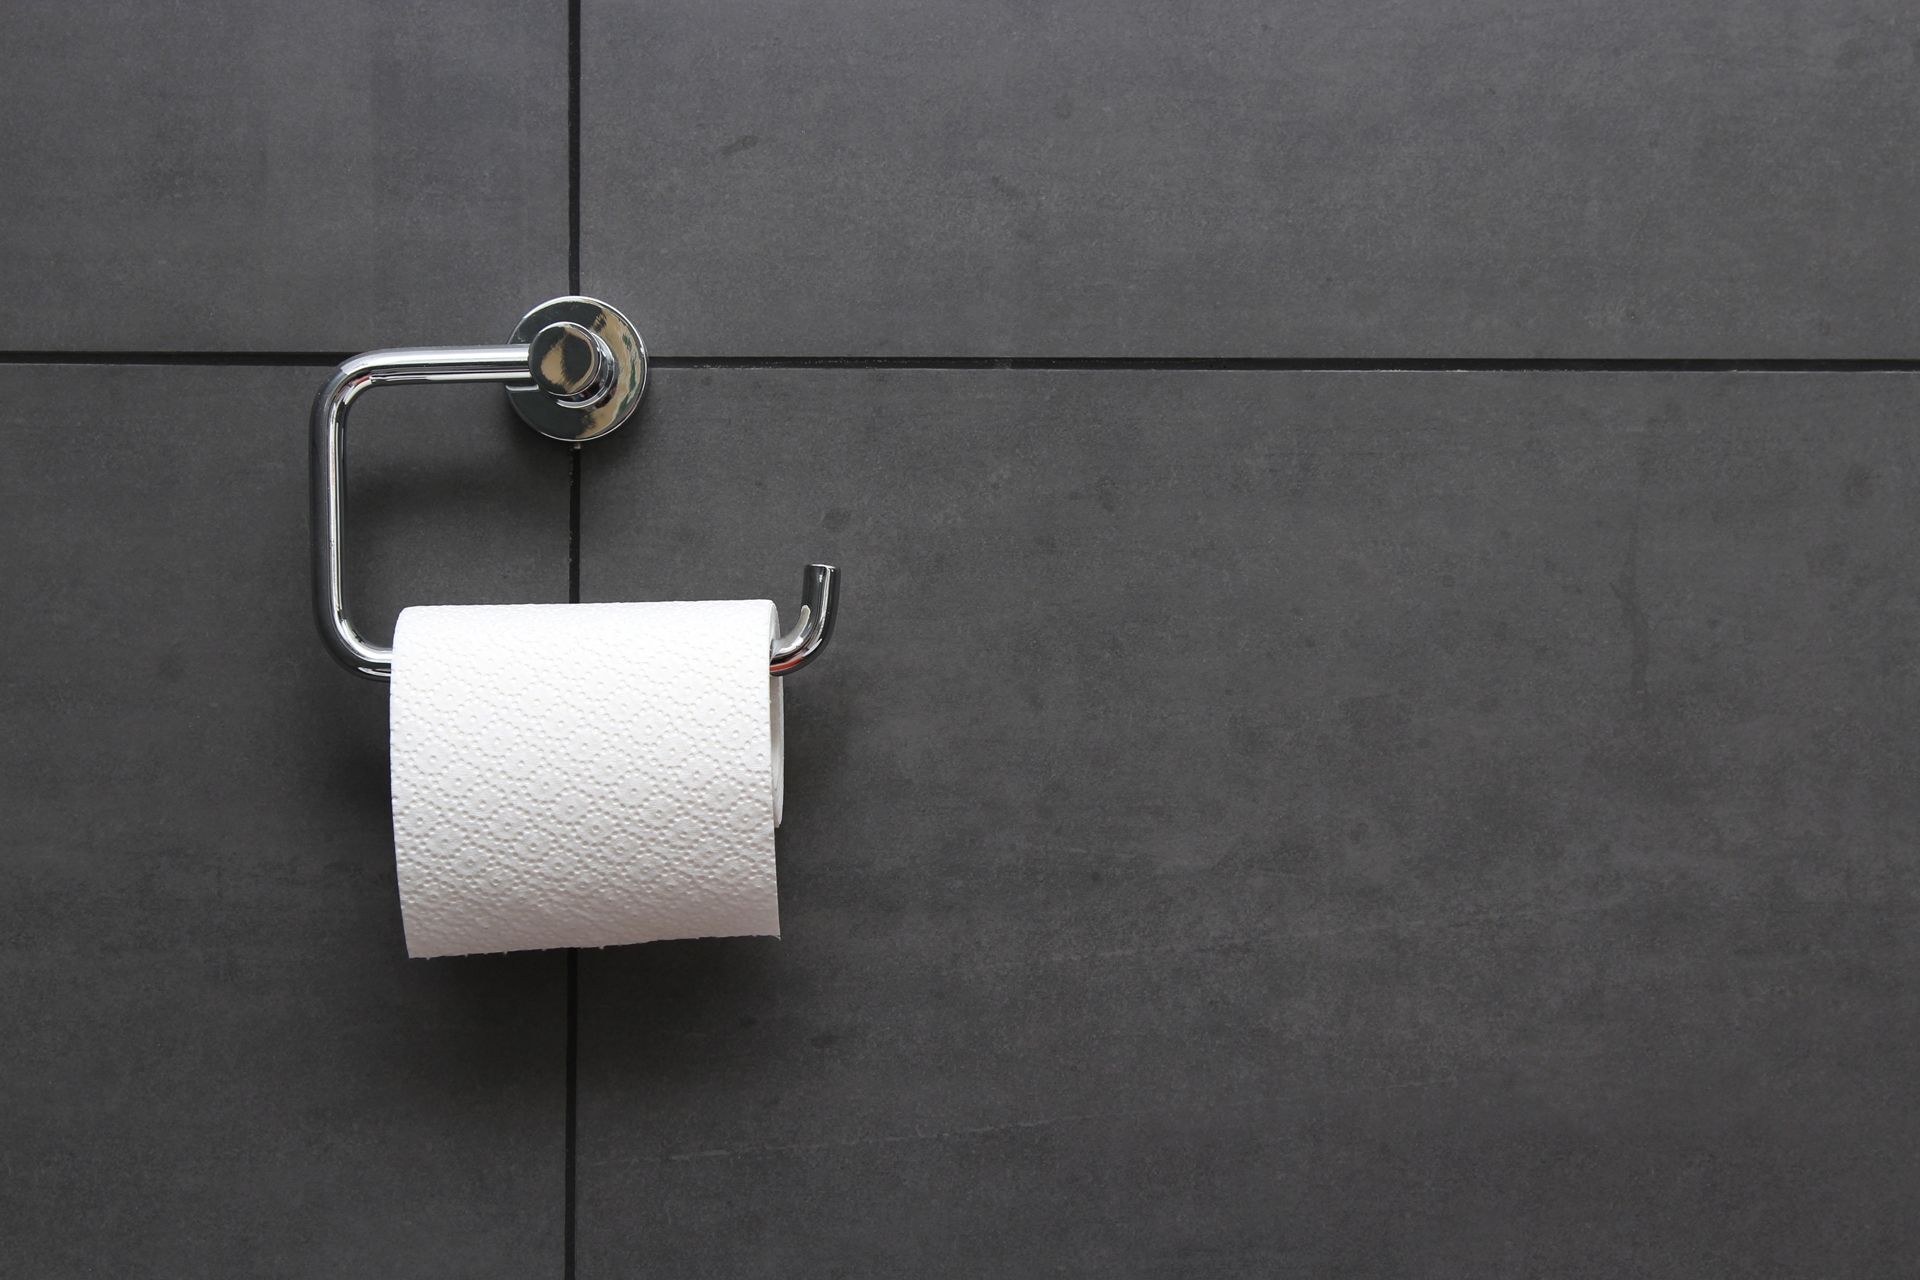 Toilet paper holder against a grey wall